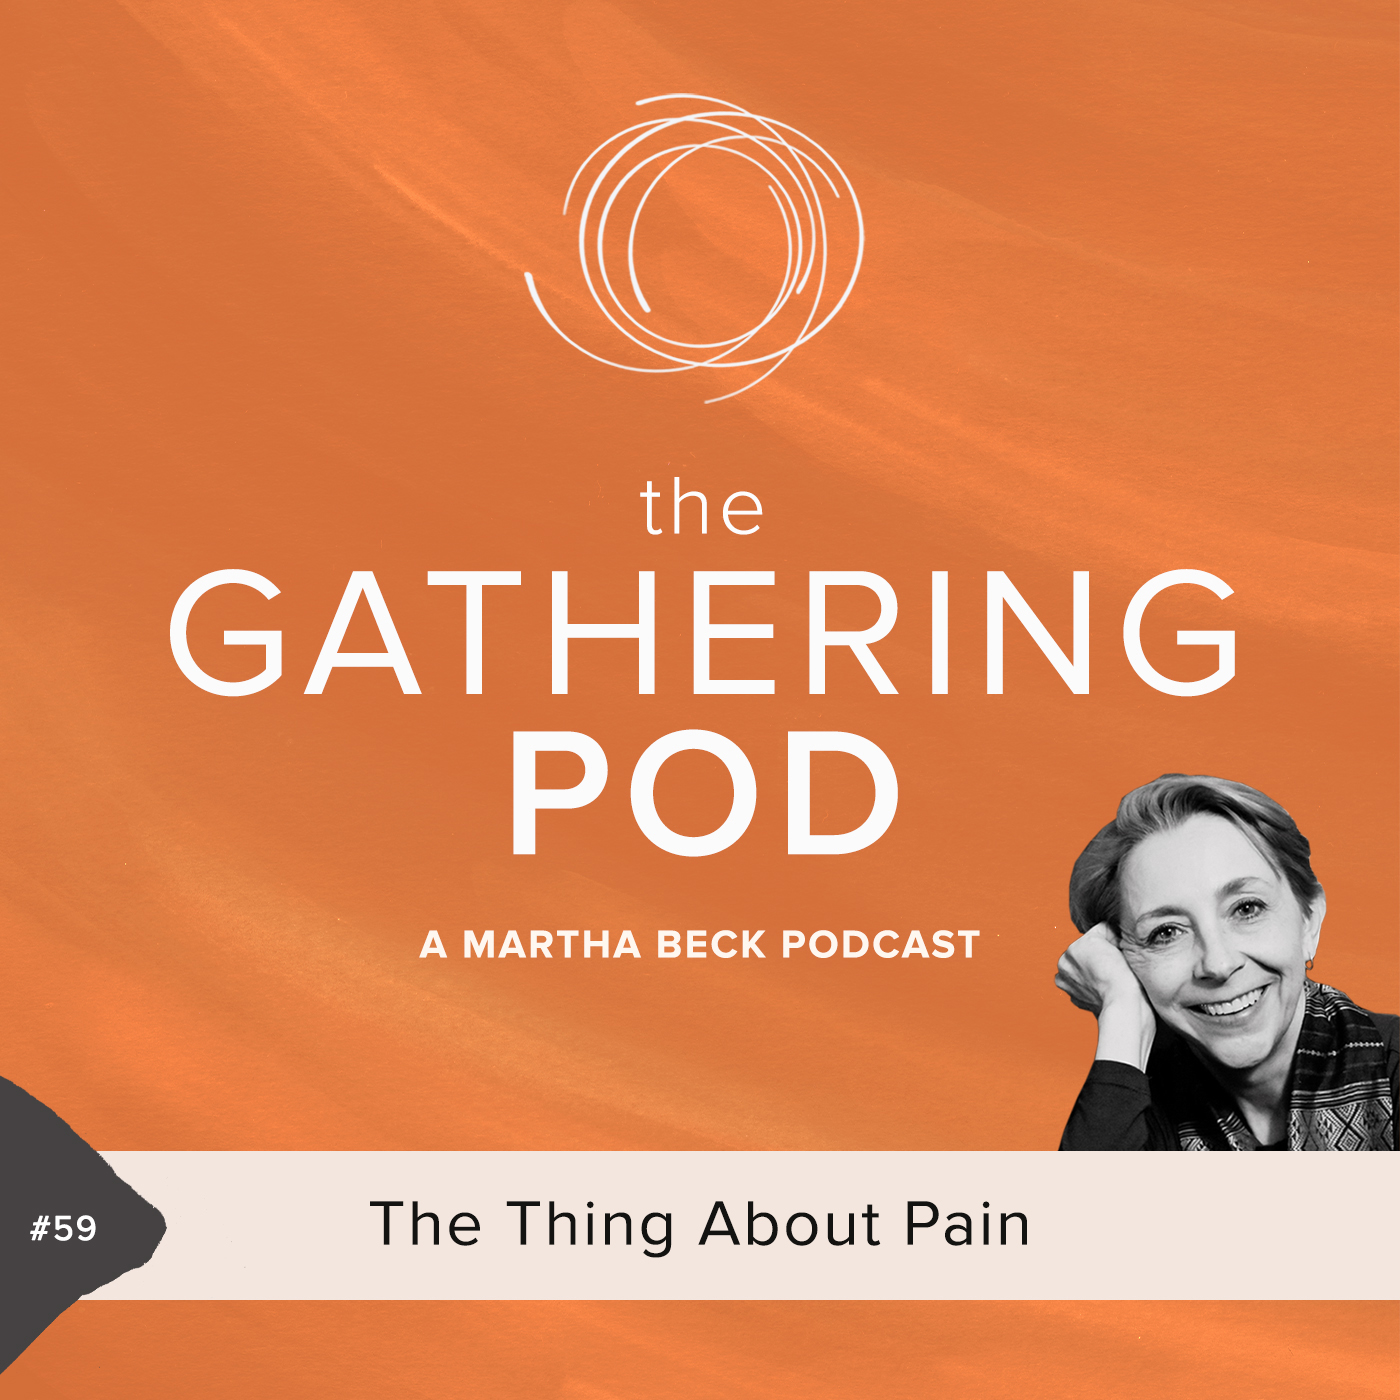 Image for The Gathering Pod A Martha Beck Podcast Episode #59 The Thing About Pain